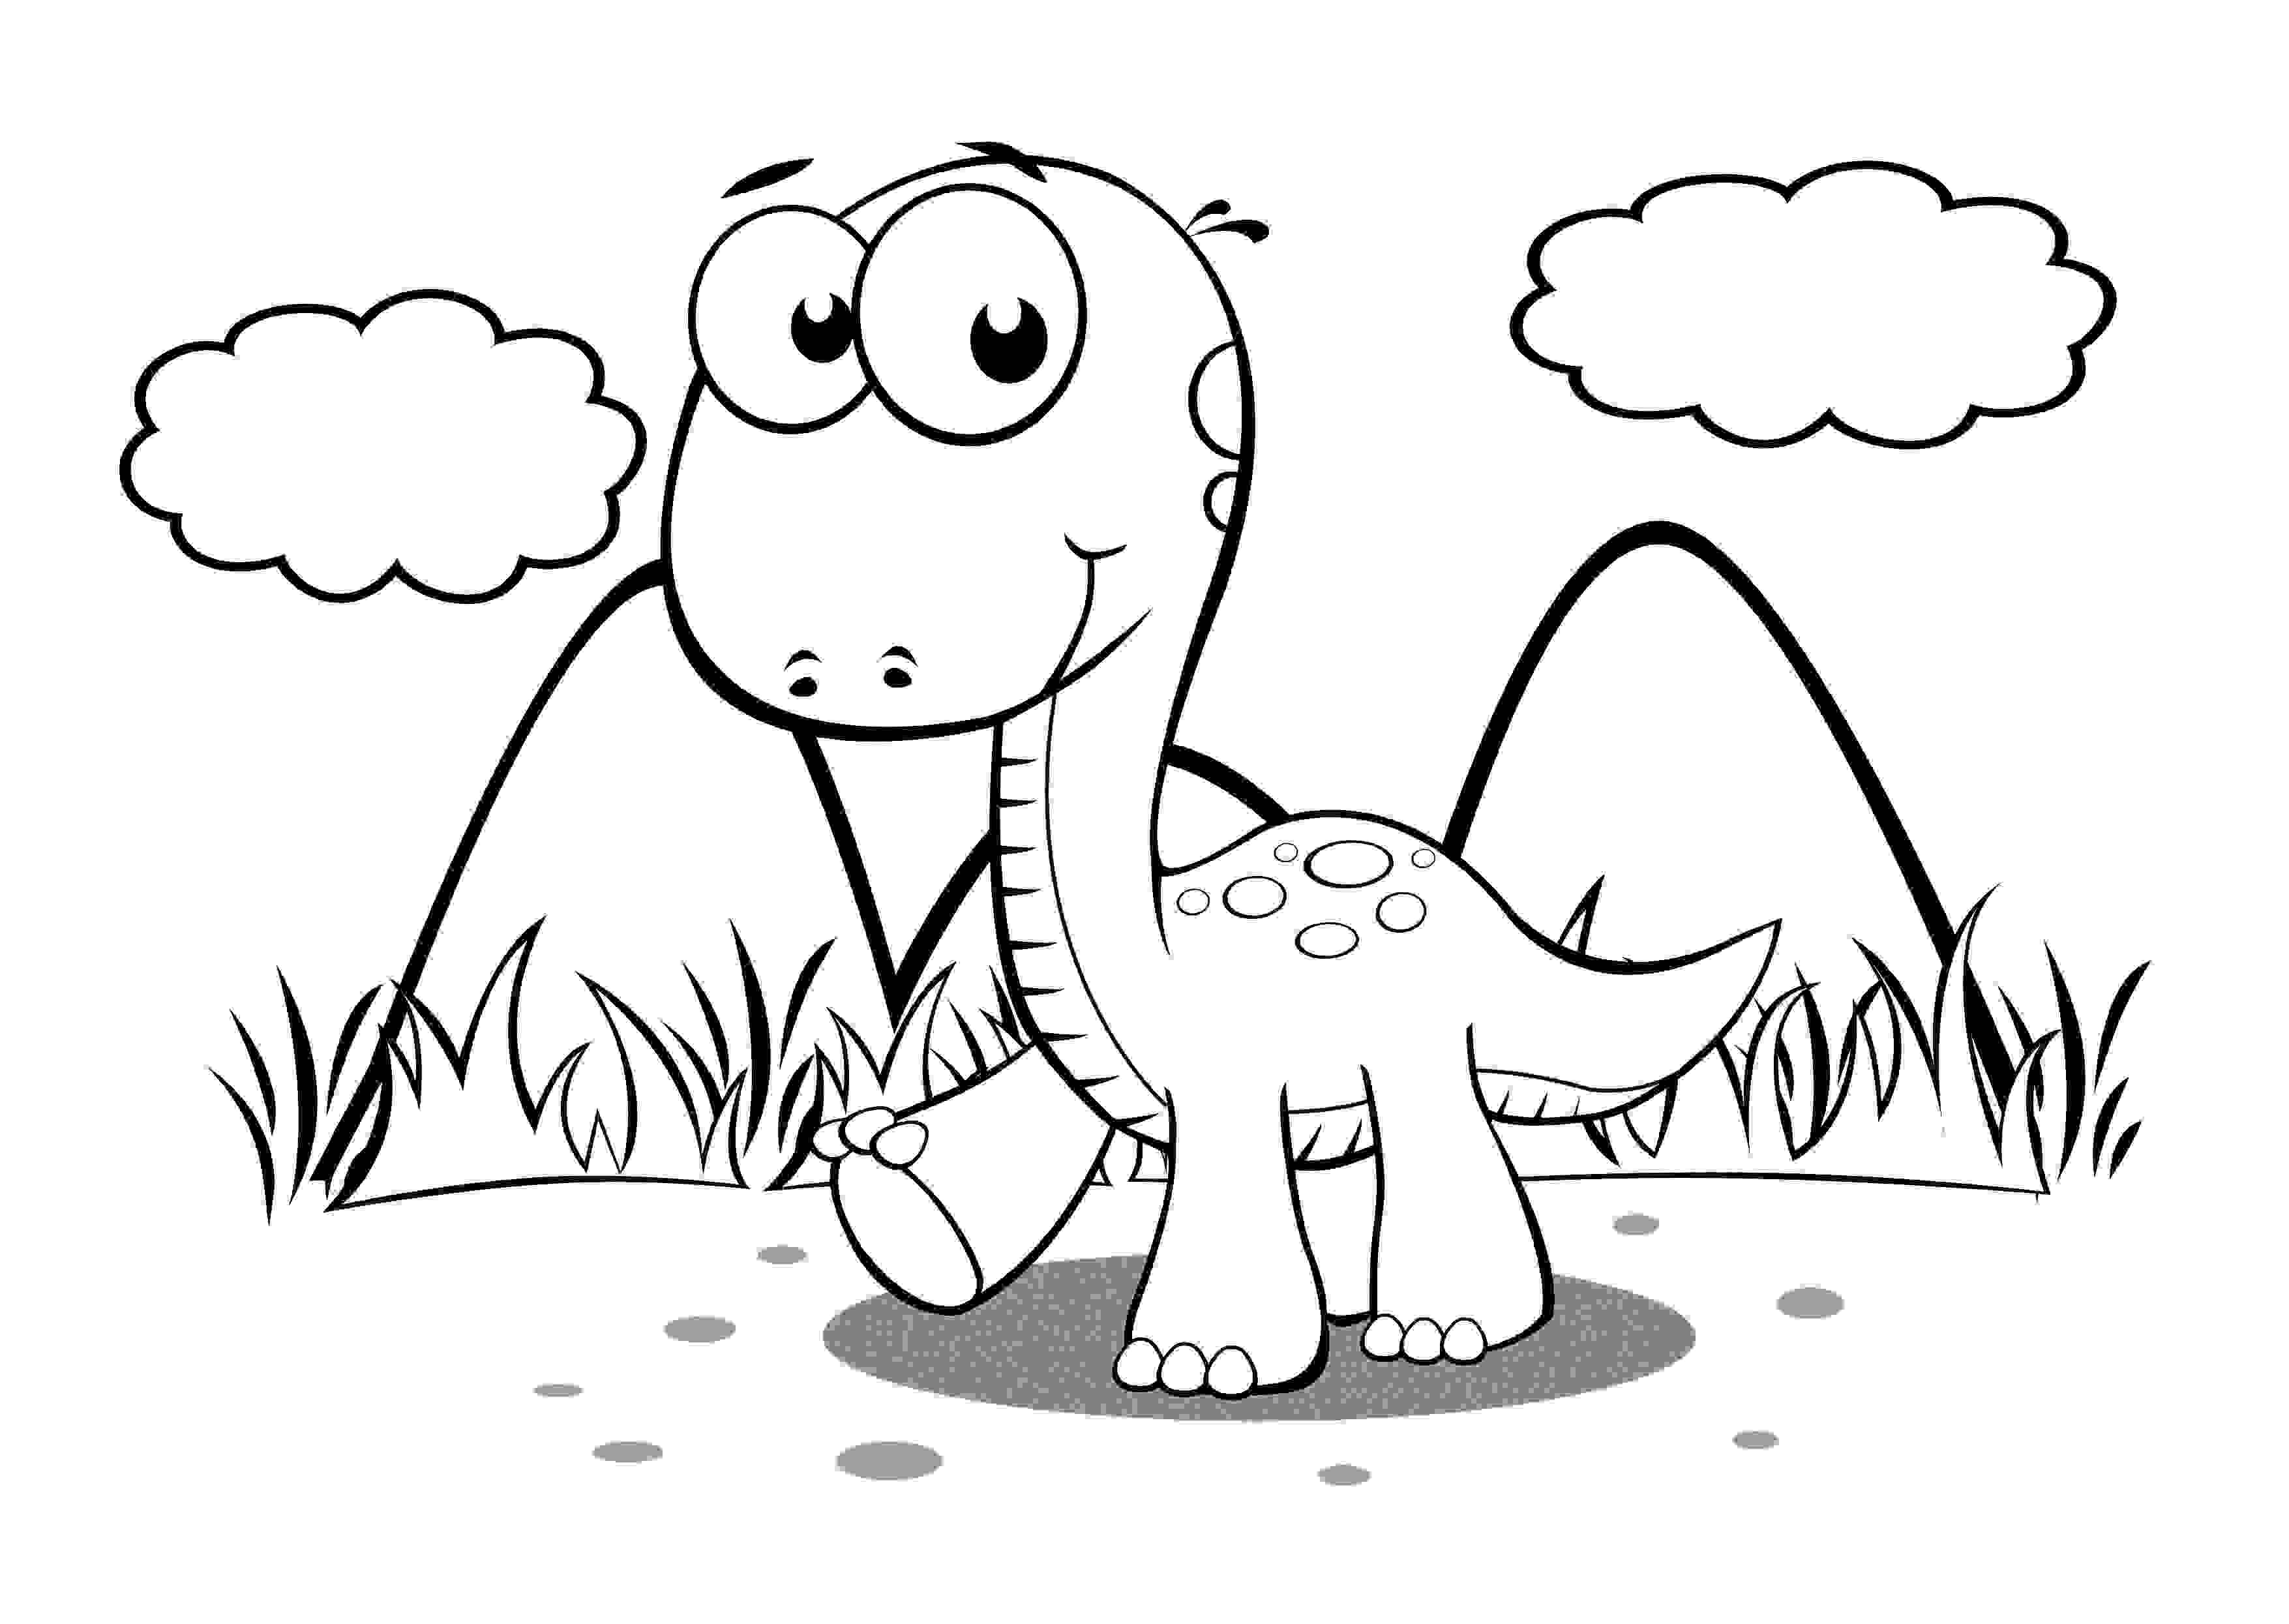 Baby Dinosaur goes around on cloud day Coloring Pages - Misc. Dinosaurs  Coloring Pages - Coloring Pages For Kids And Adults